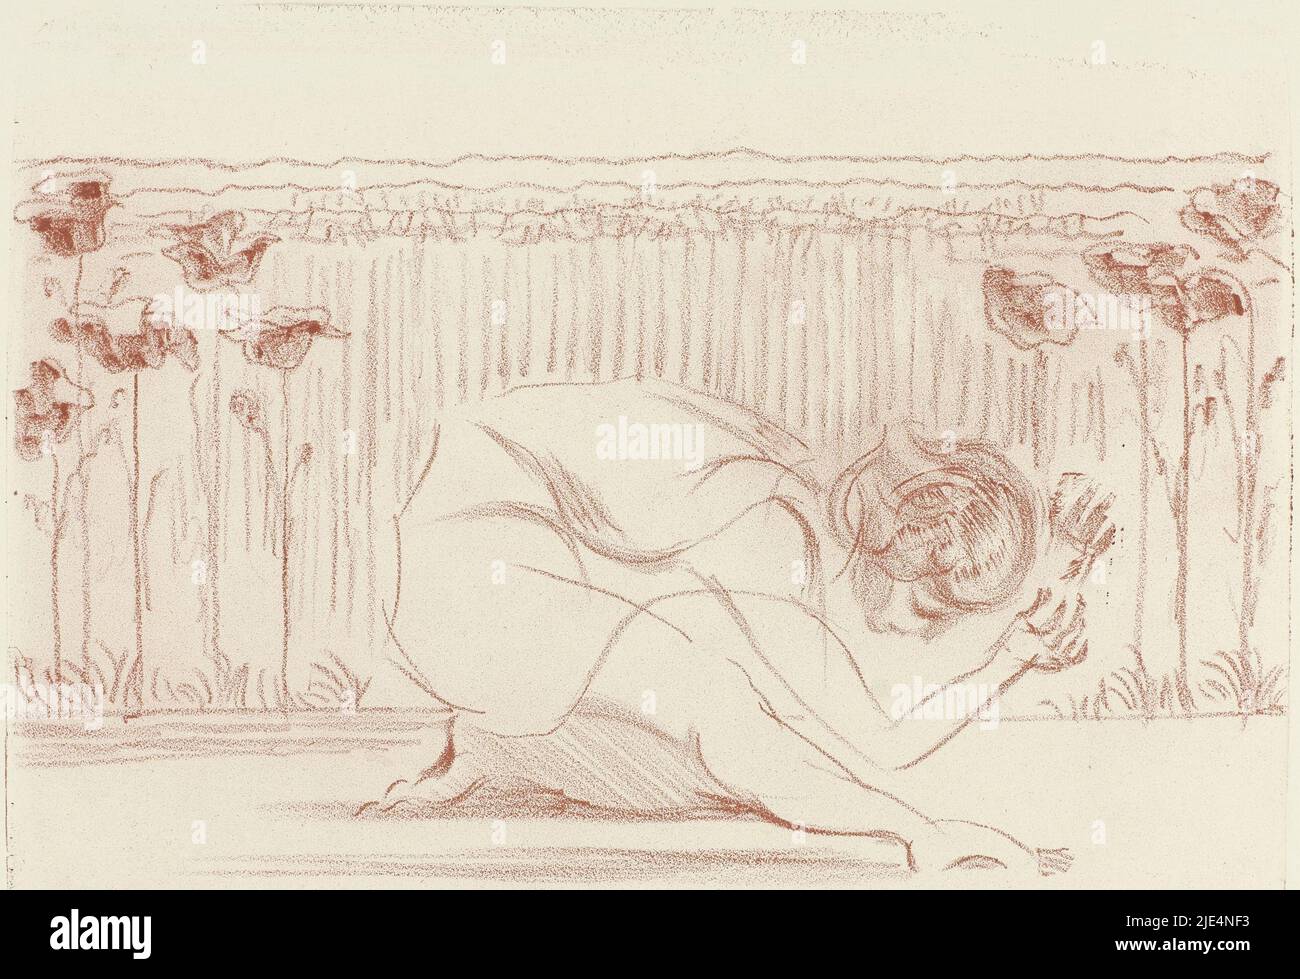 Woman bent forward on her knees with a stretched leg, and profil. Behind her a hedge with flowers, dancing 'May'. Number 1 (original title on object), print maker: Henri Braakensiek, (signed by artist), 1922, paper, h 214 mm × w 269 mm, h 285 mm × w 284 mm Stock Photo